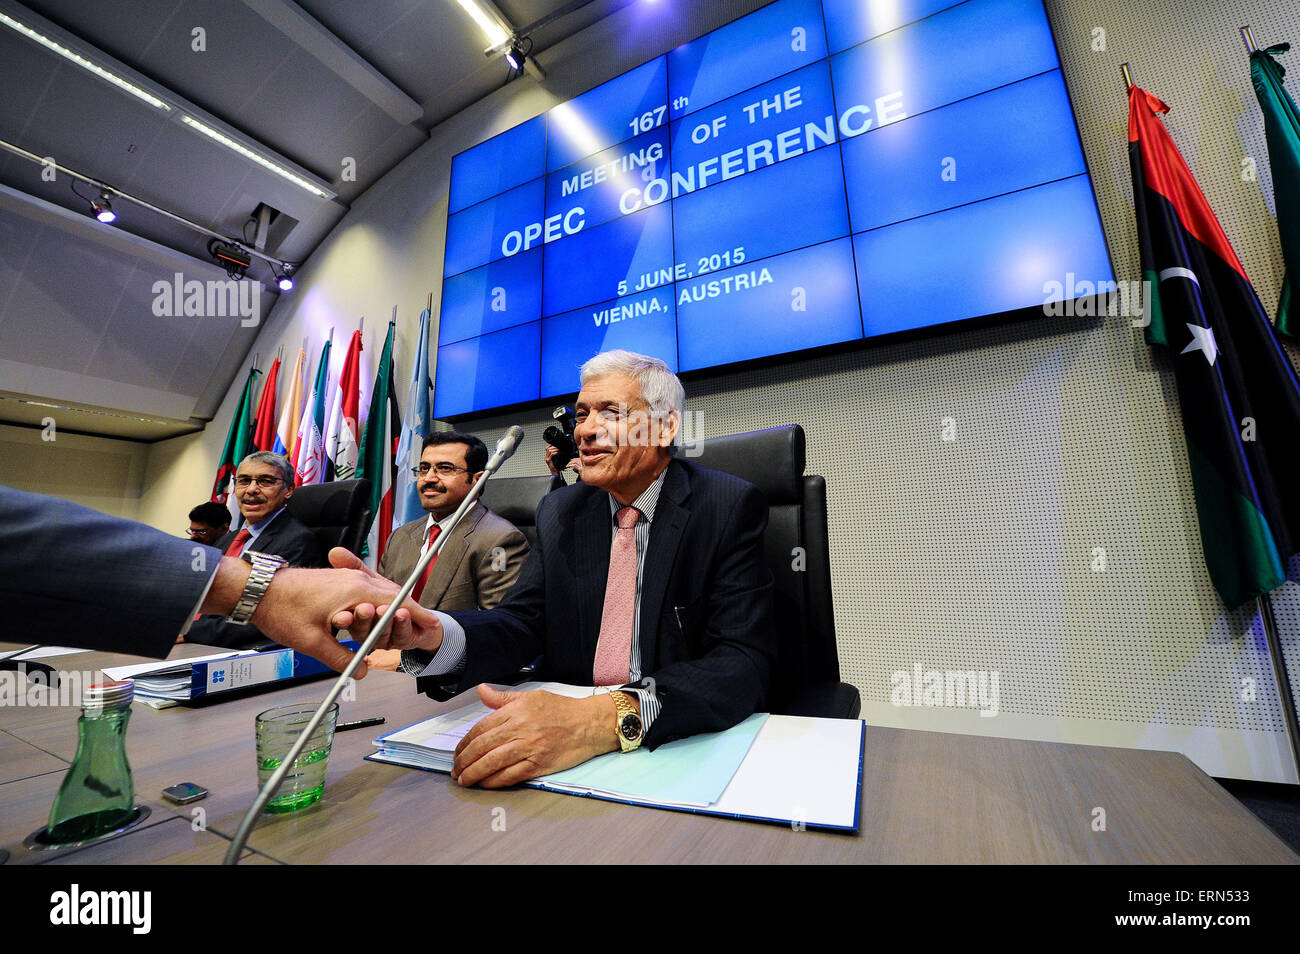 Vienna, Austria. 5th June, 2015. OPEC Secretary General Abdullah al-Badri (C) speaks to journalists before the 167th Ministerial Meeting of the Organization of the Petroleum Exporting Countries (OPEC) at the headquarters of OPEC in Vienna, Austria, June 5, 2015. Credit:  Qian Yi/Xinhua/Alamy Live News Stock Photo